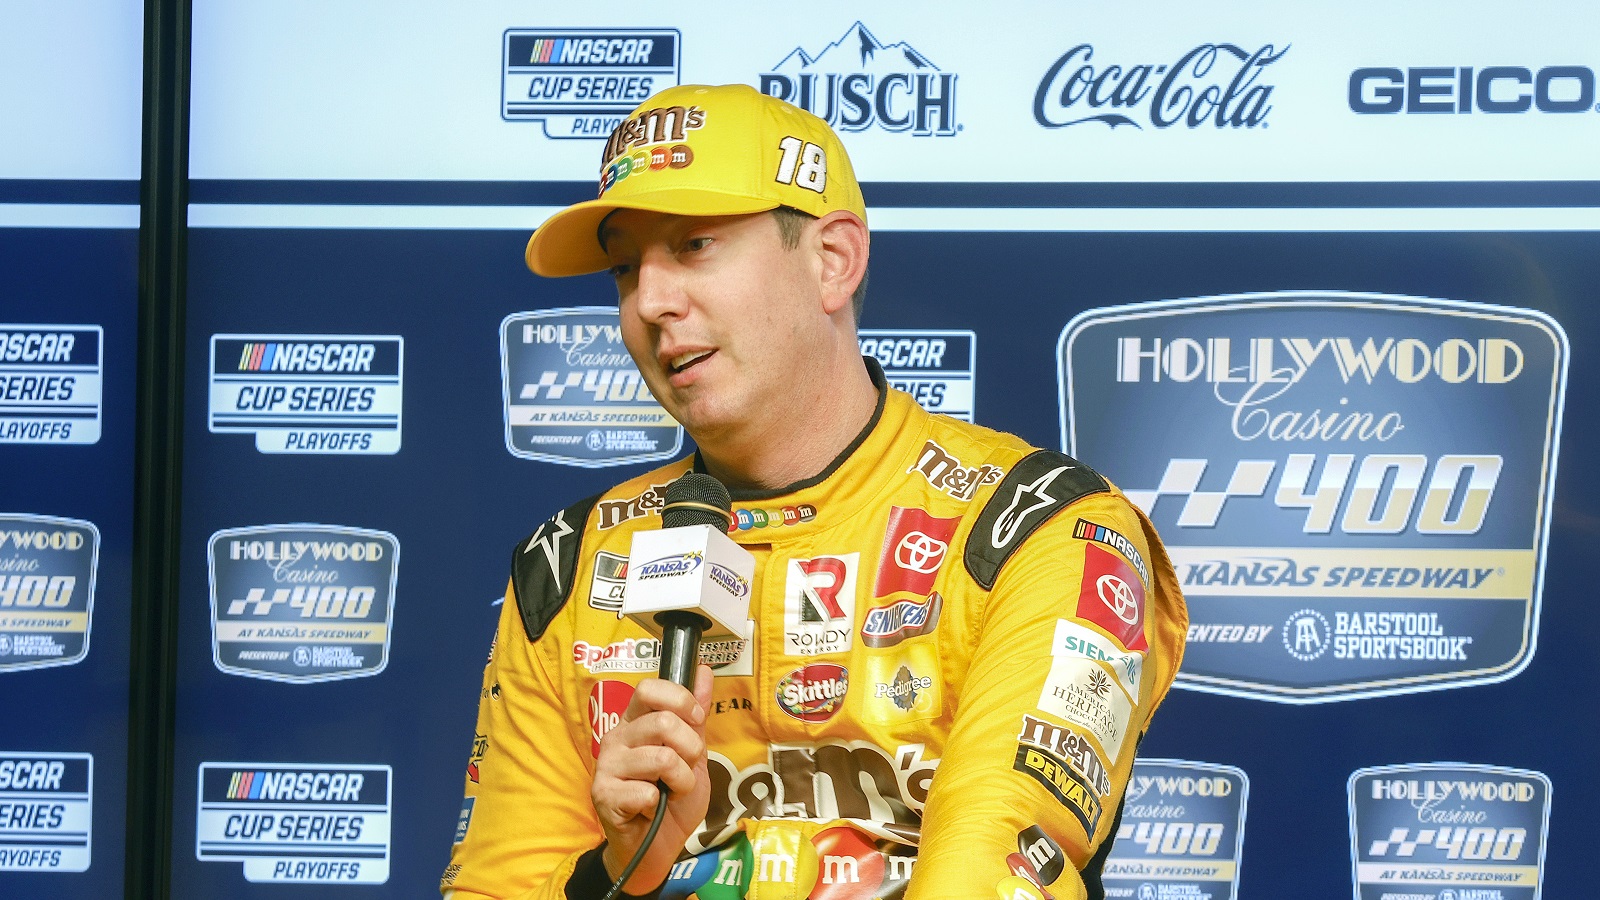 Kyle Busch speaks to the media during a news conference after practice for the NASCAR Cup Series Hollywood Casino 400 at Kansas Speedway on Sept. 10, 2022. | Chris Graythen/Getty Images